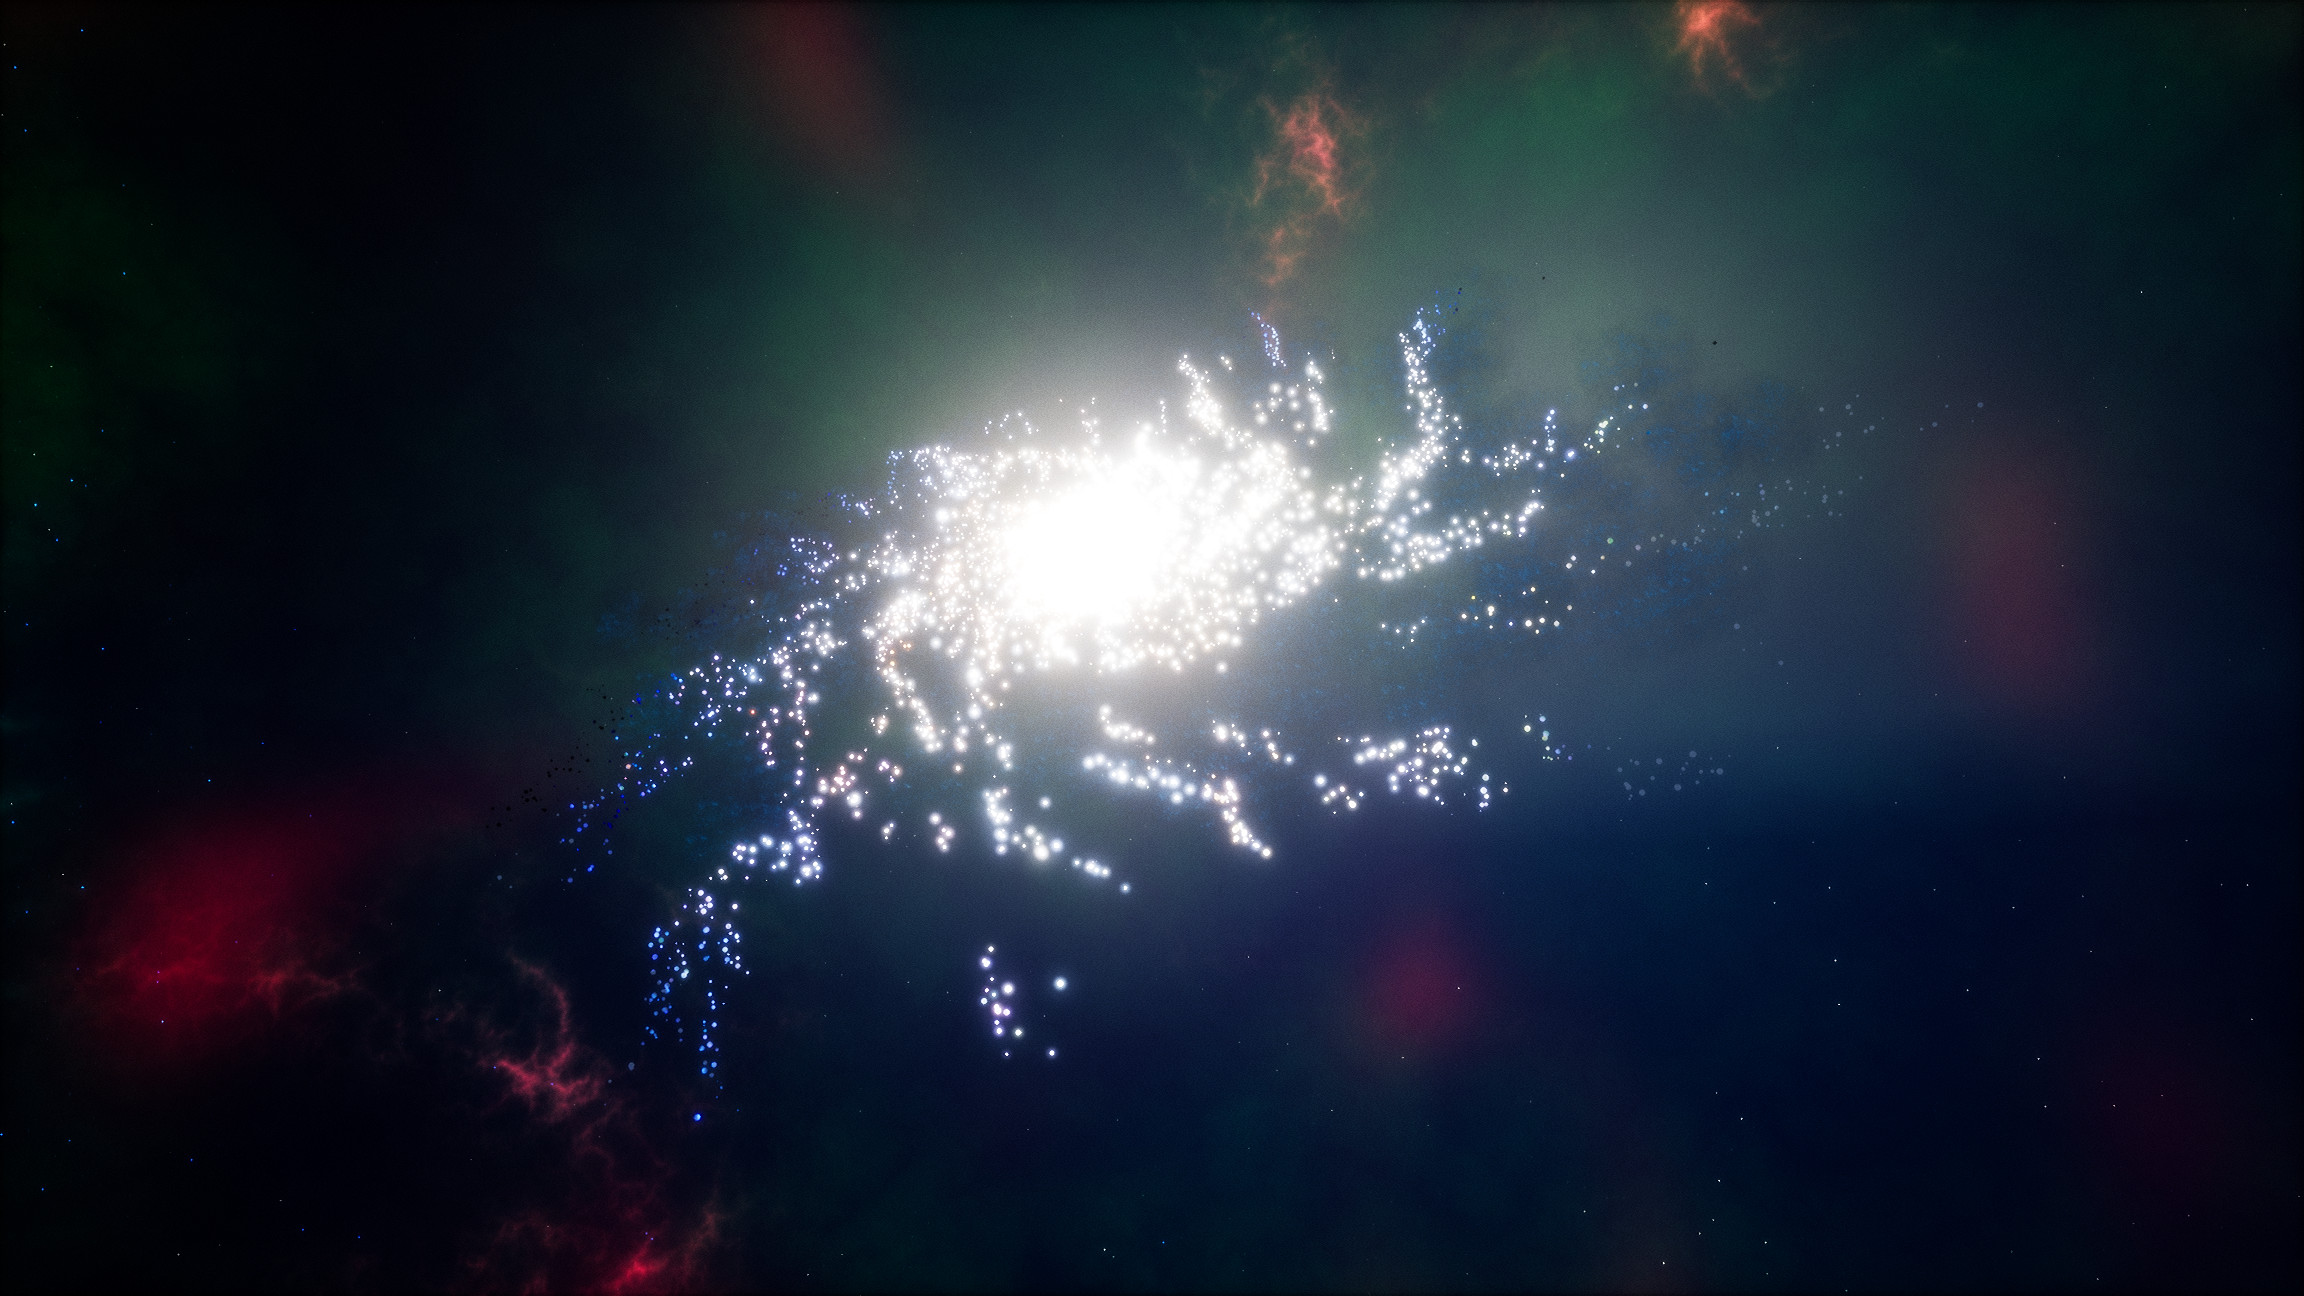 Houdini generated shape of the galaxy. Gas cloud and little stars was added with particles that spawn inside the different mesh that fit all the planets and stars